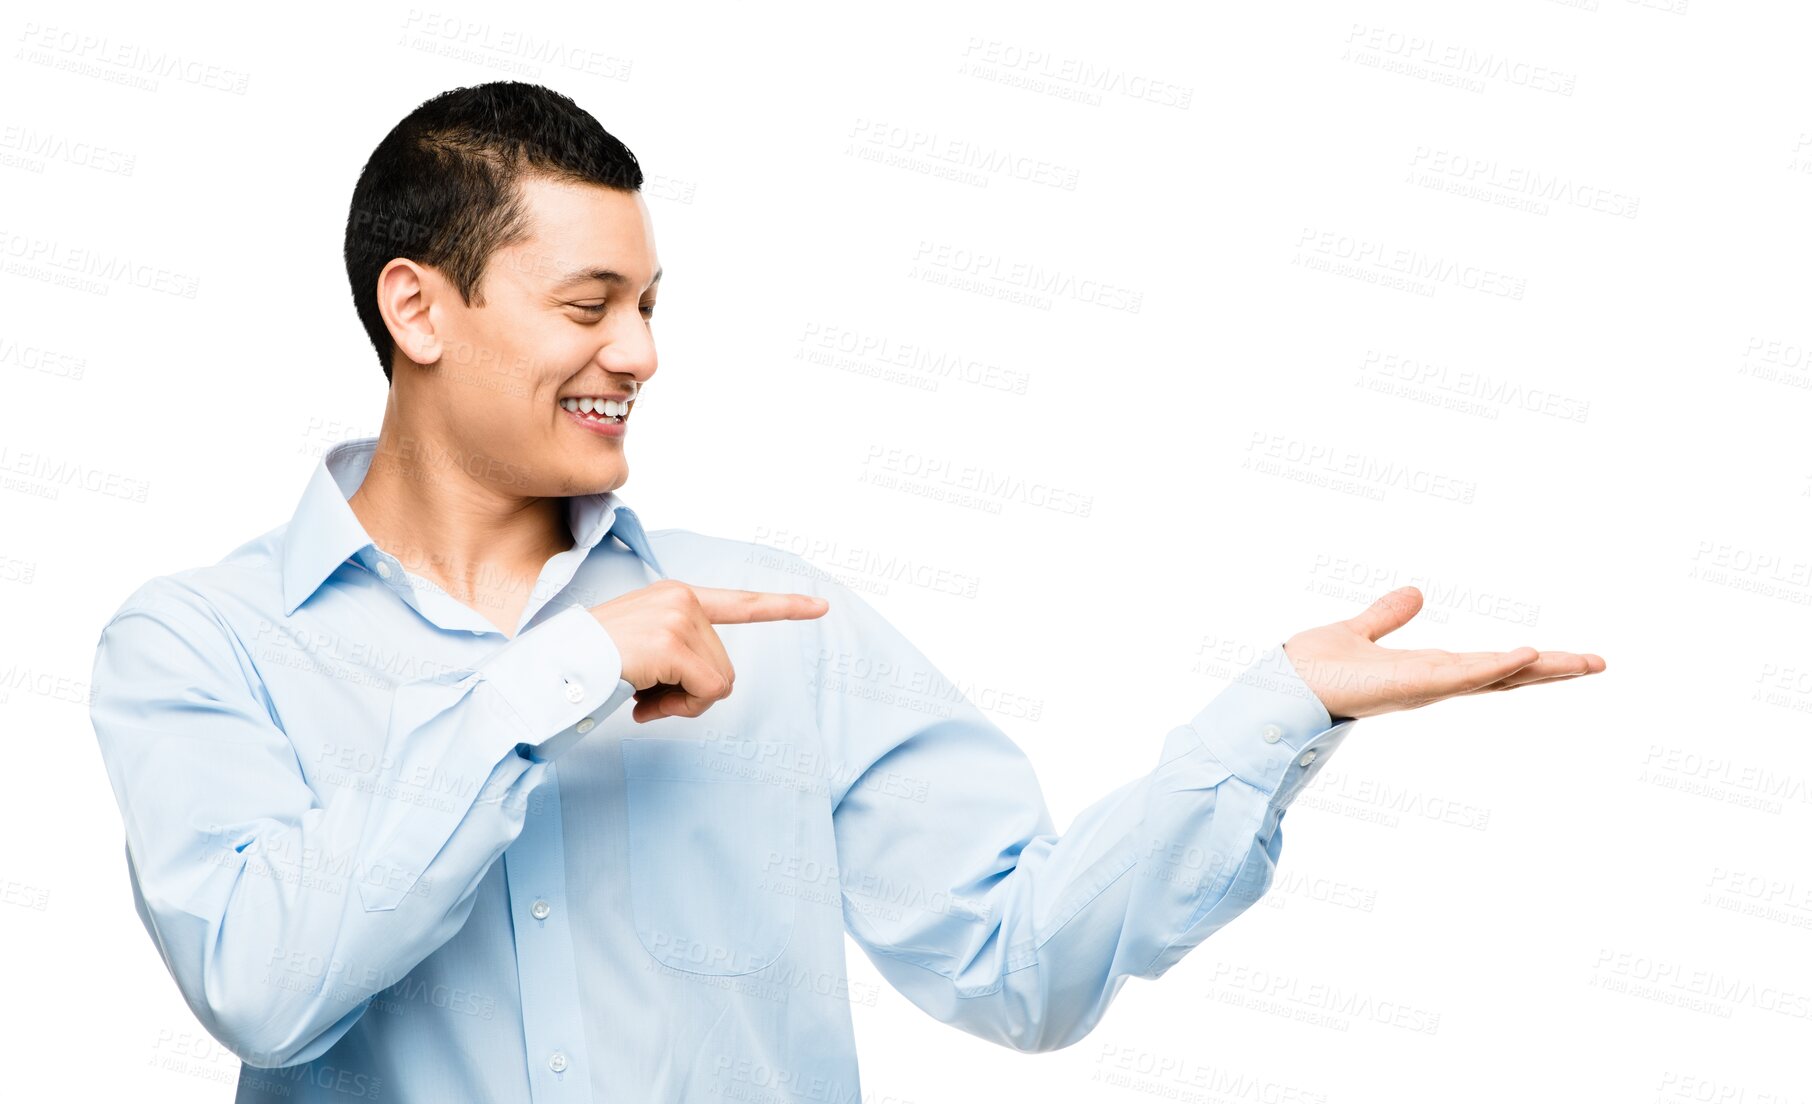 Buy stock photo Smile, announcement and happy Asian man pointing at offer, isolated on transparent png background. Promotion, information and business person showing deal space with hand gesture and excited smile.